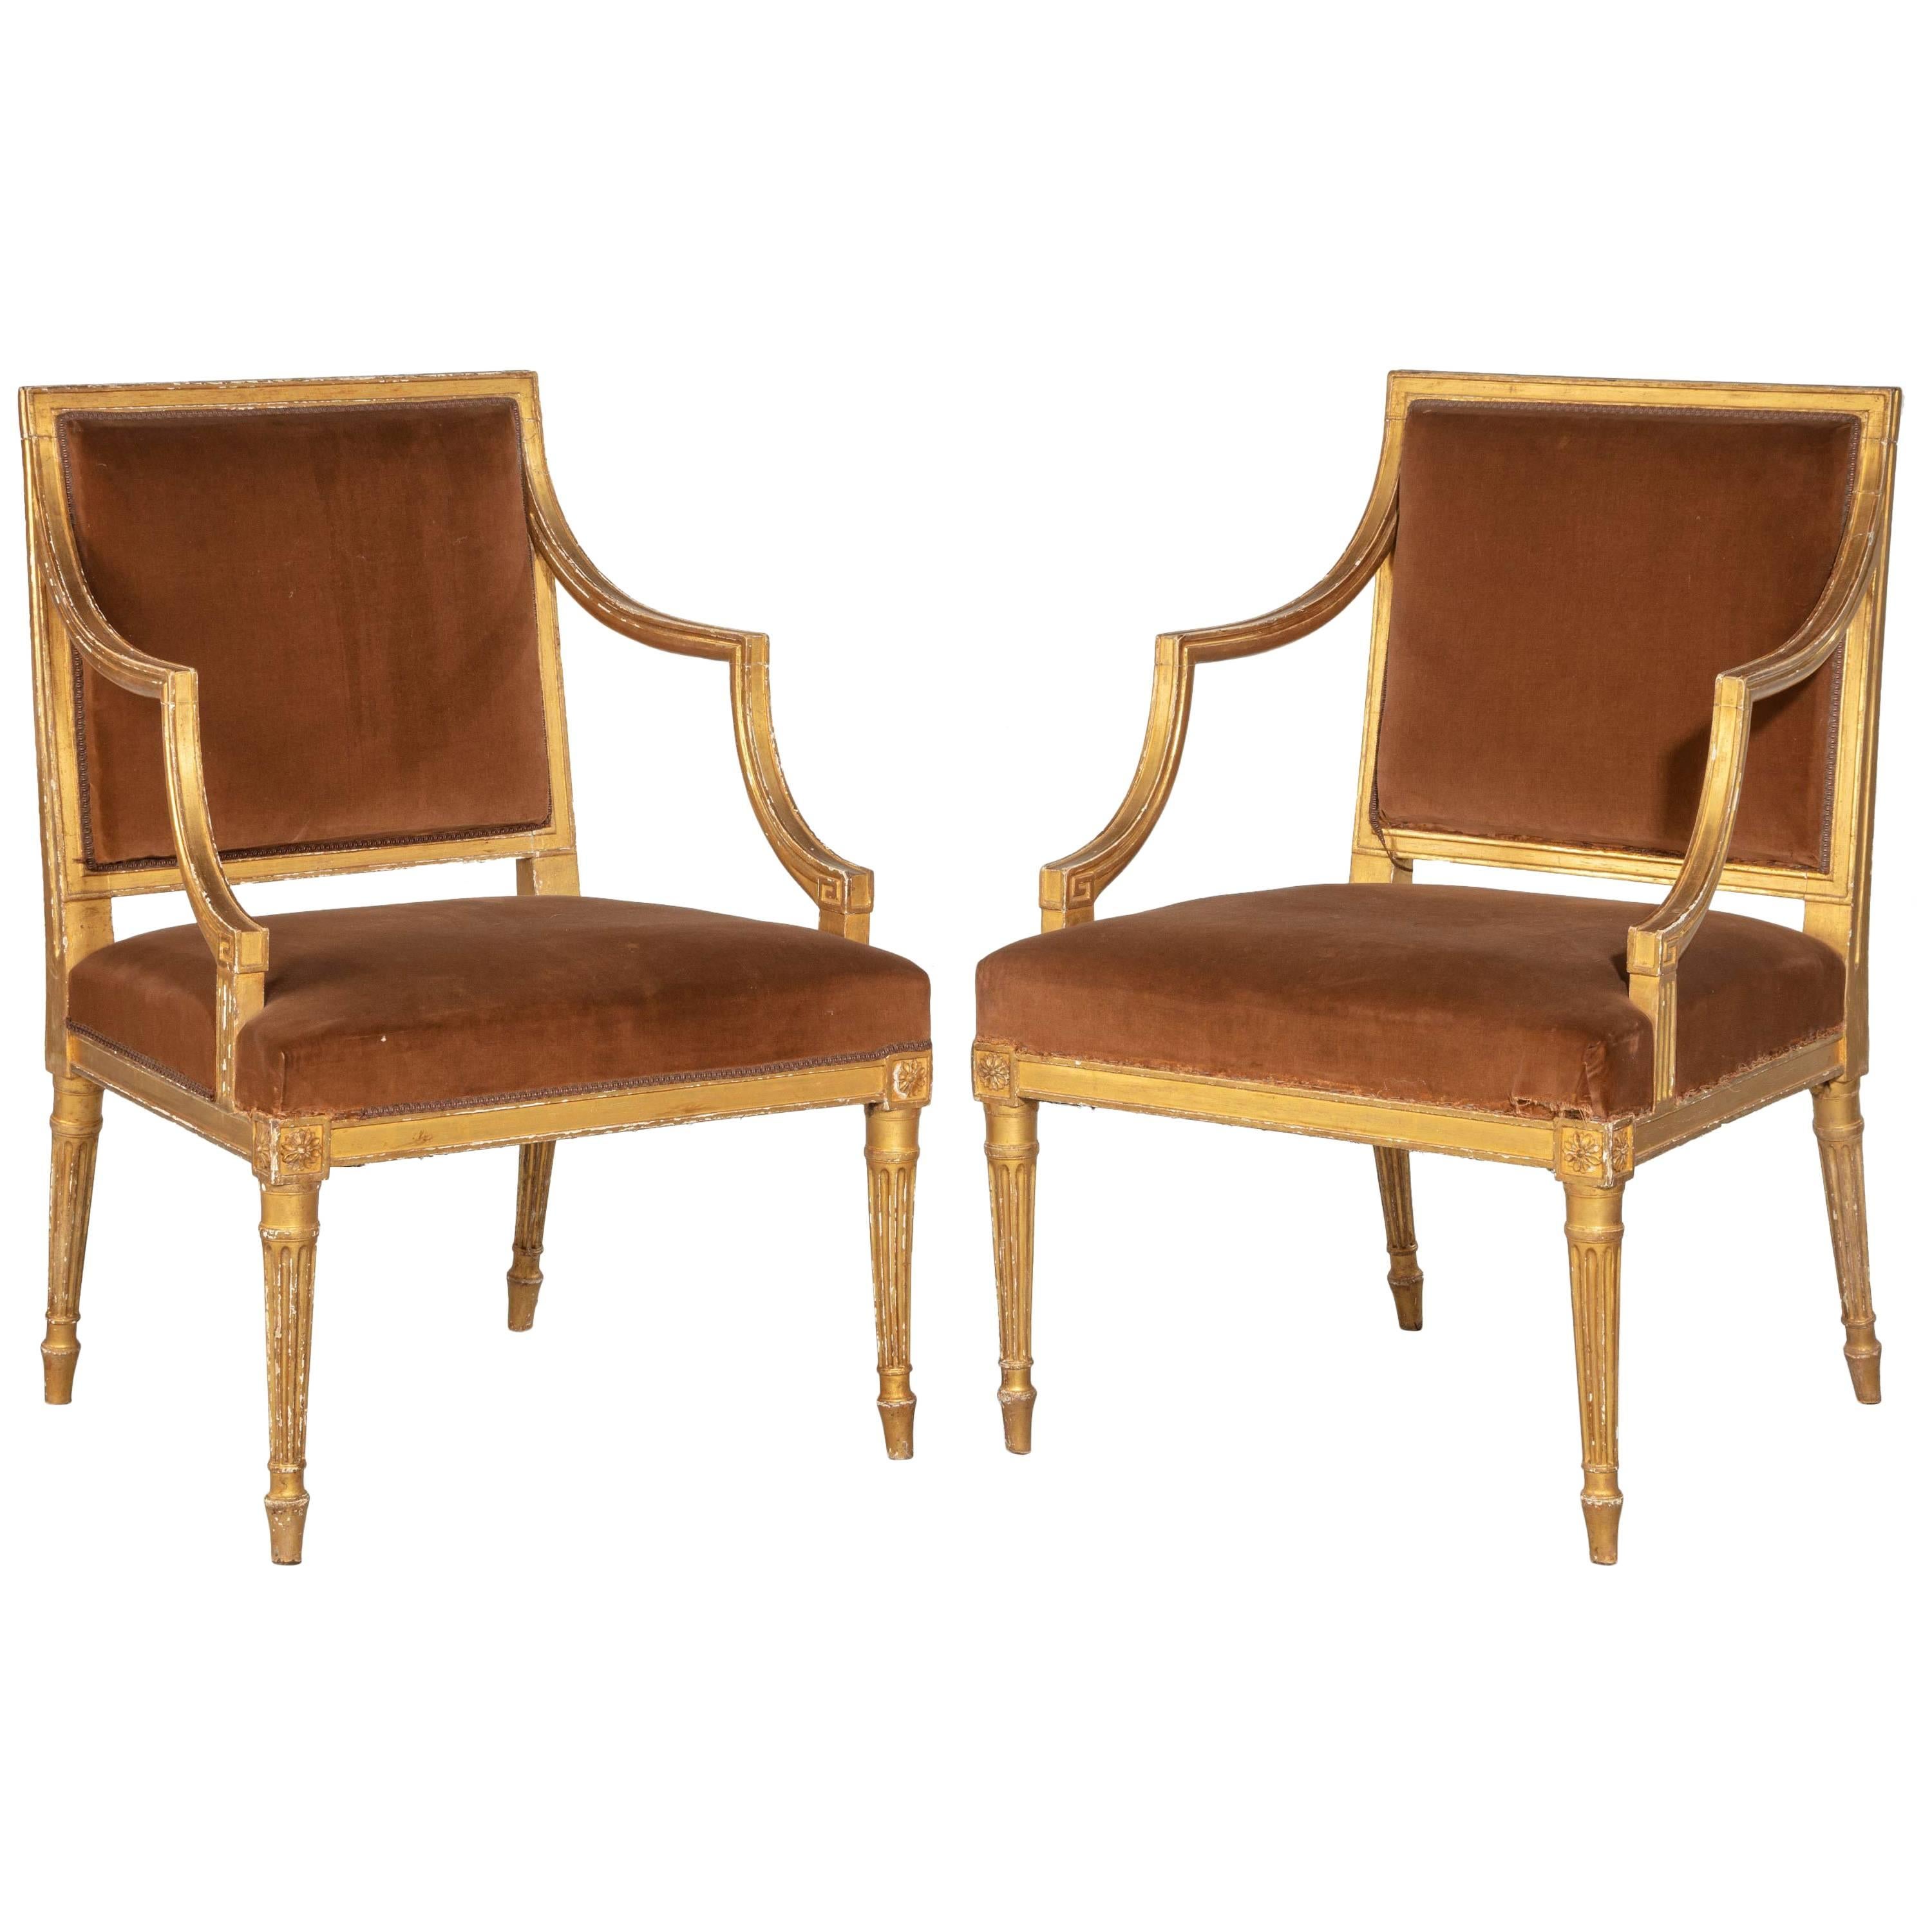 Pair of Chippendale Period Giltwood Elbow Chairs